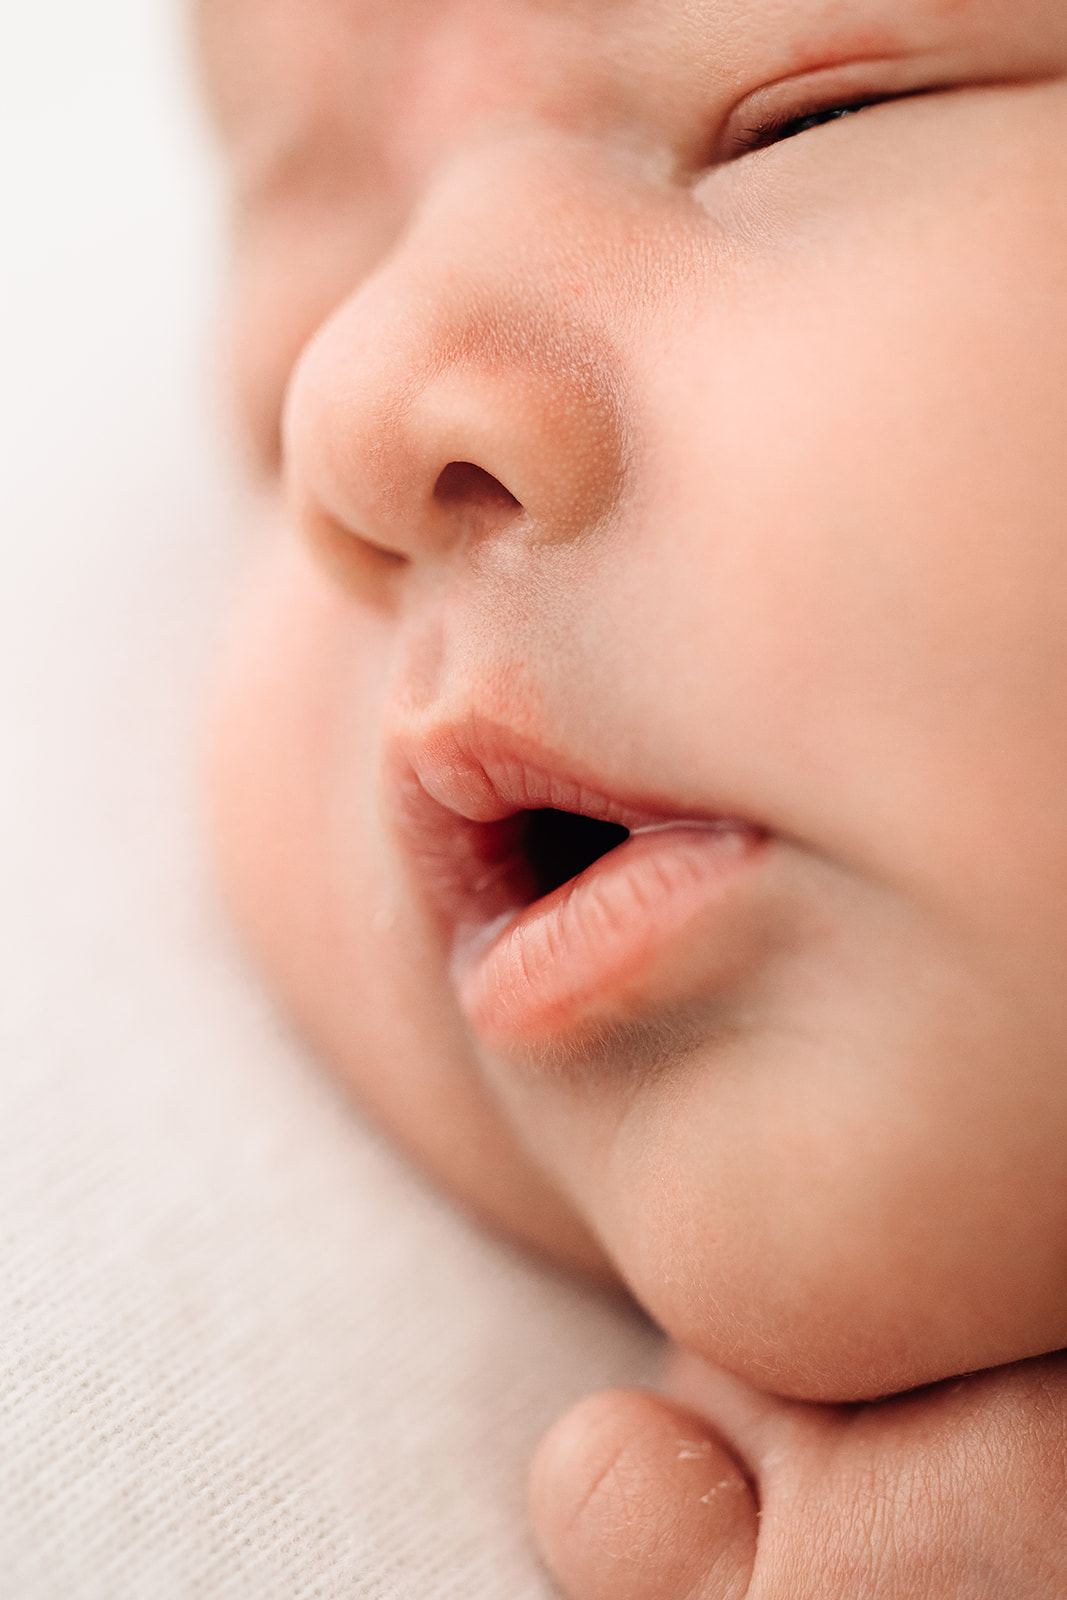 A sleeping newborn baby's face with mouth open after IVF St. Louis